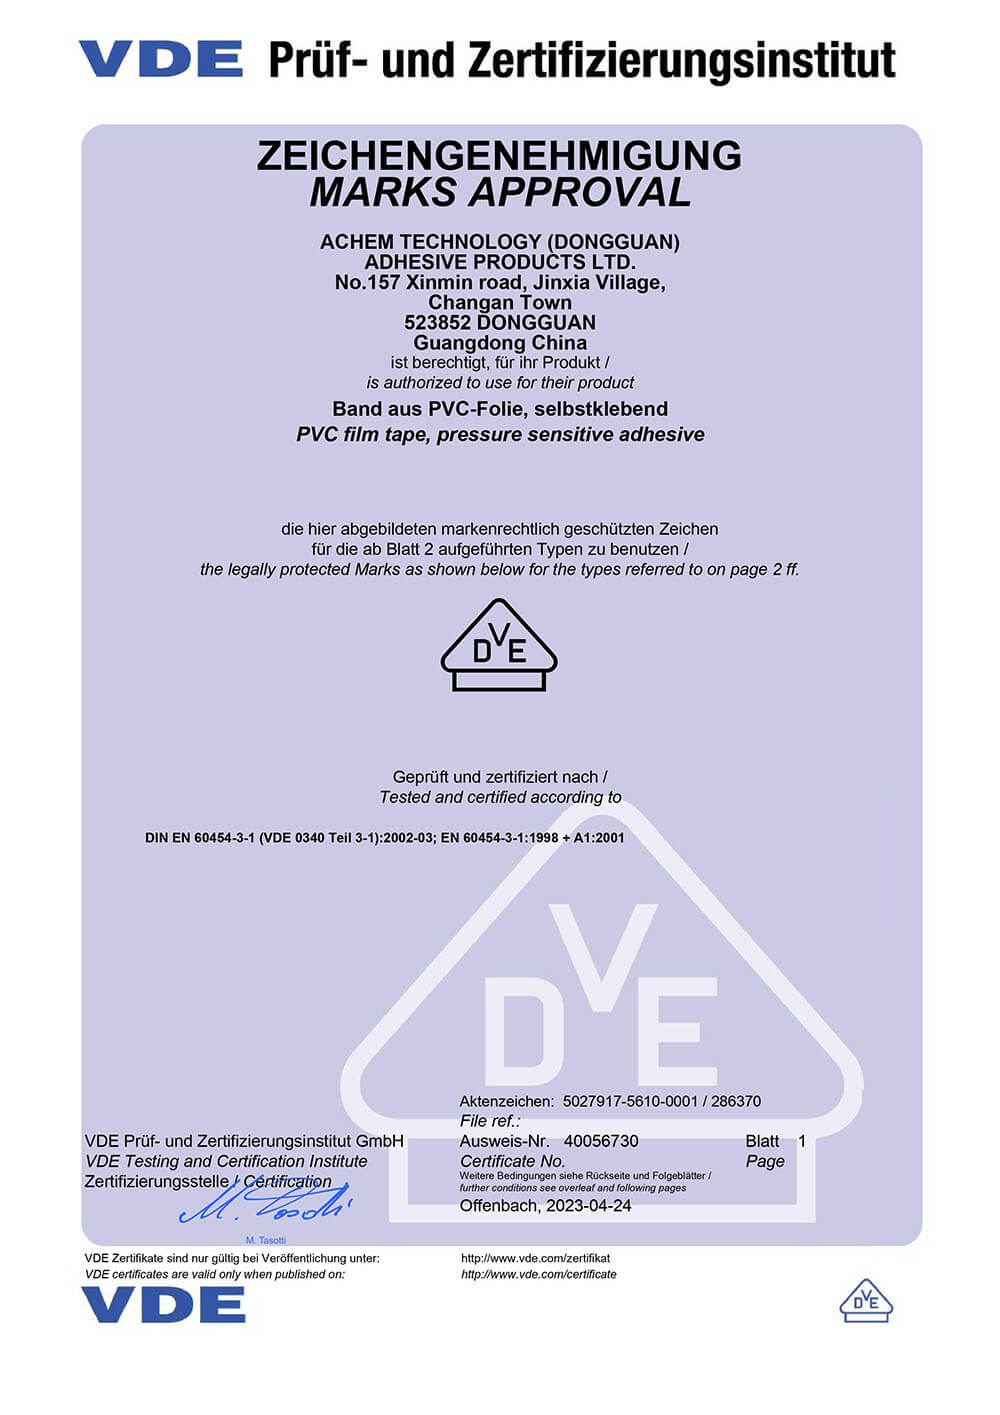 ACHEM Technology (Dongguan) Adhesive Products Ltd. PVC tape won the VDE certificate